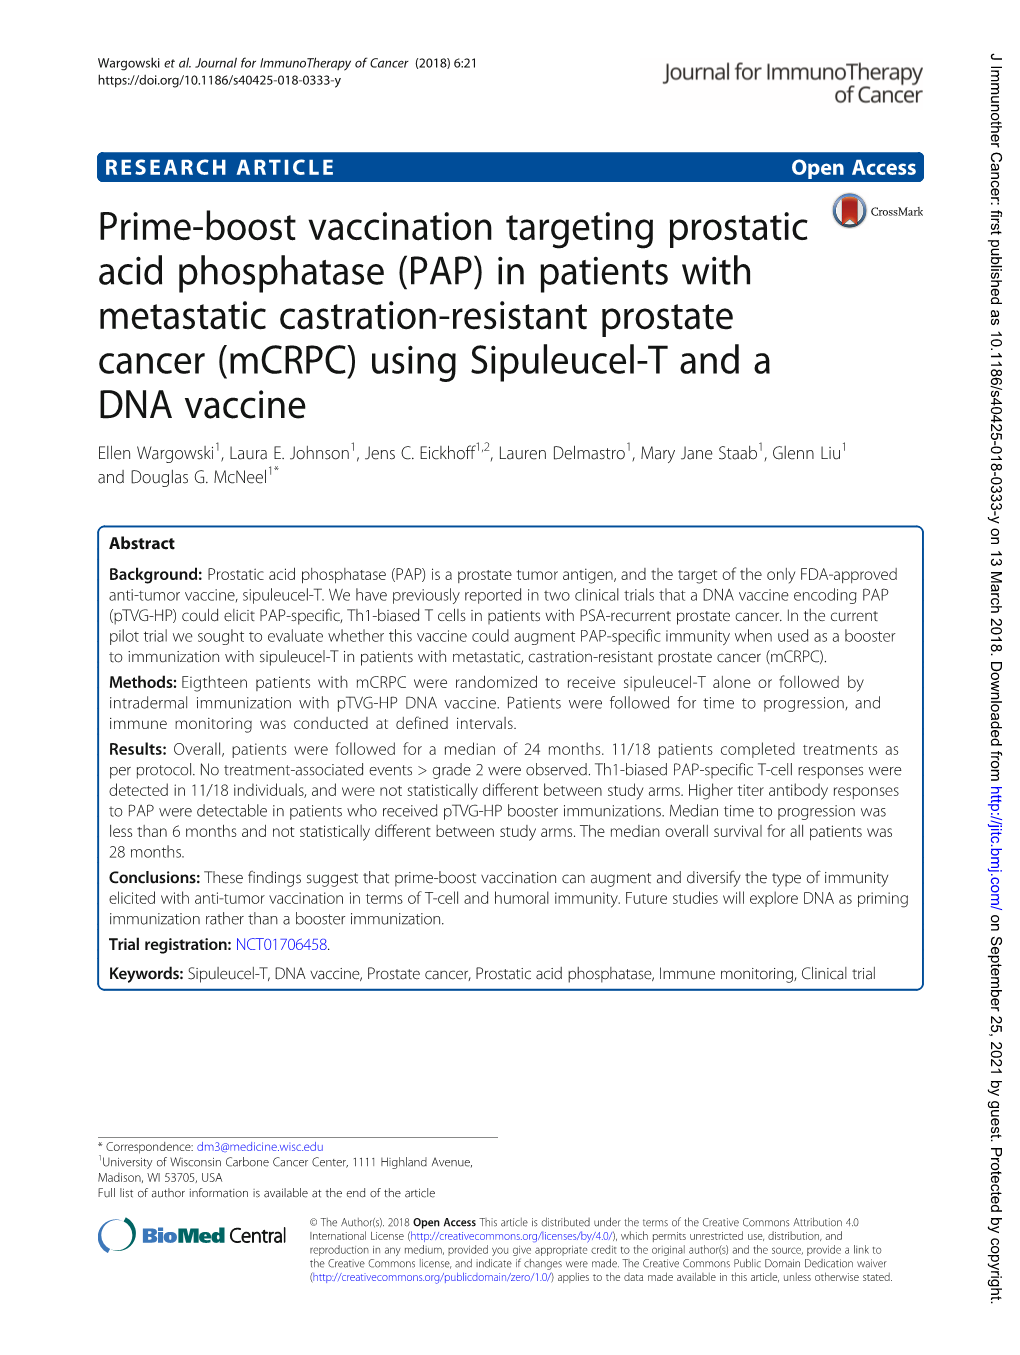 Prime-Boost Vaccination Targeting